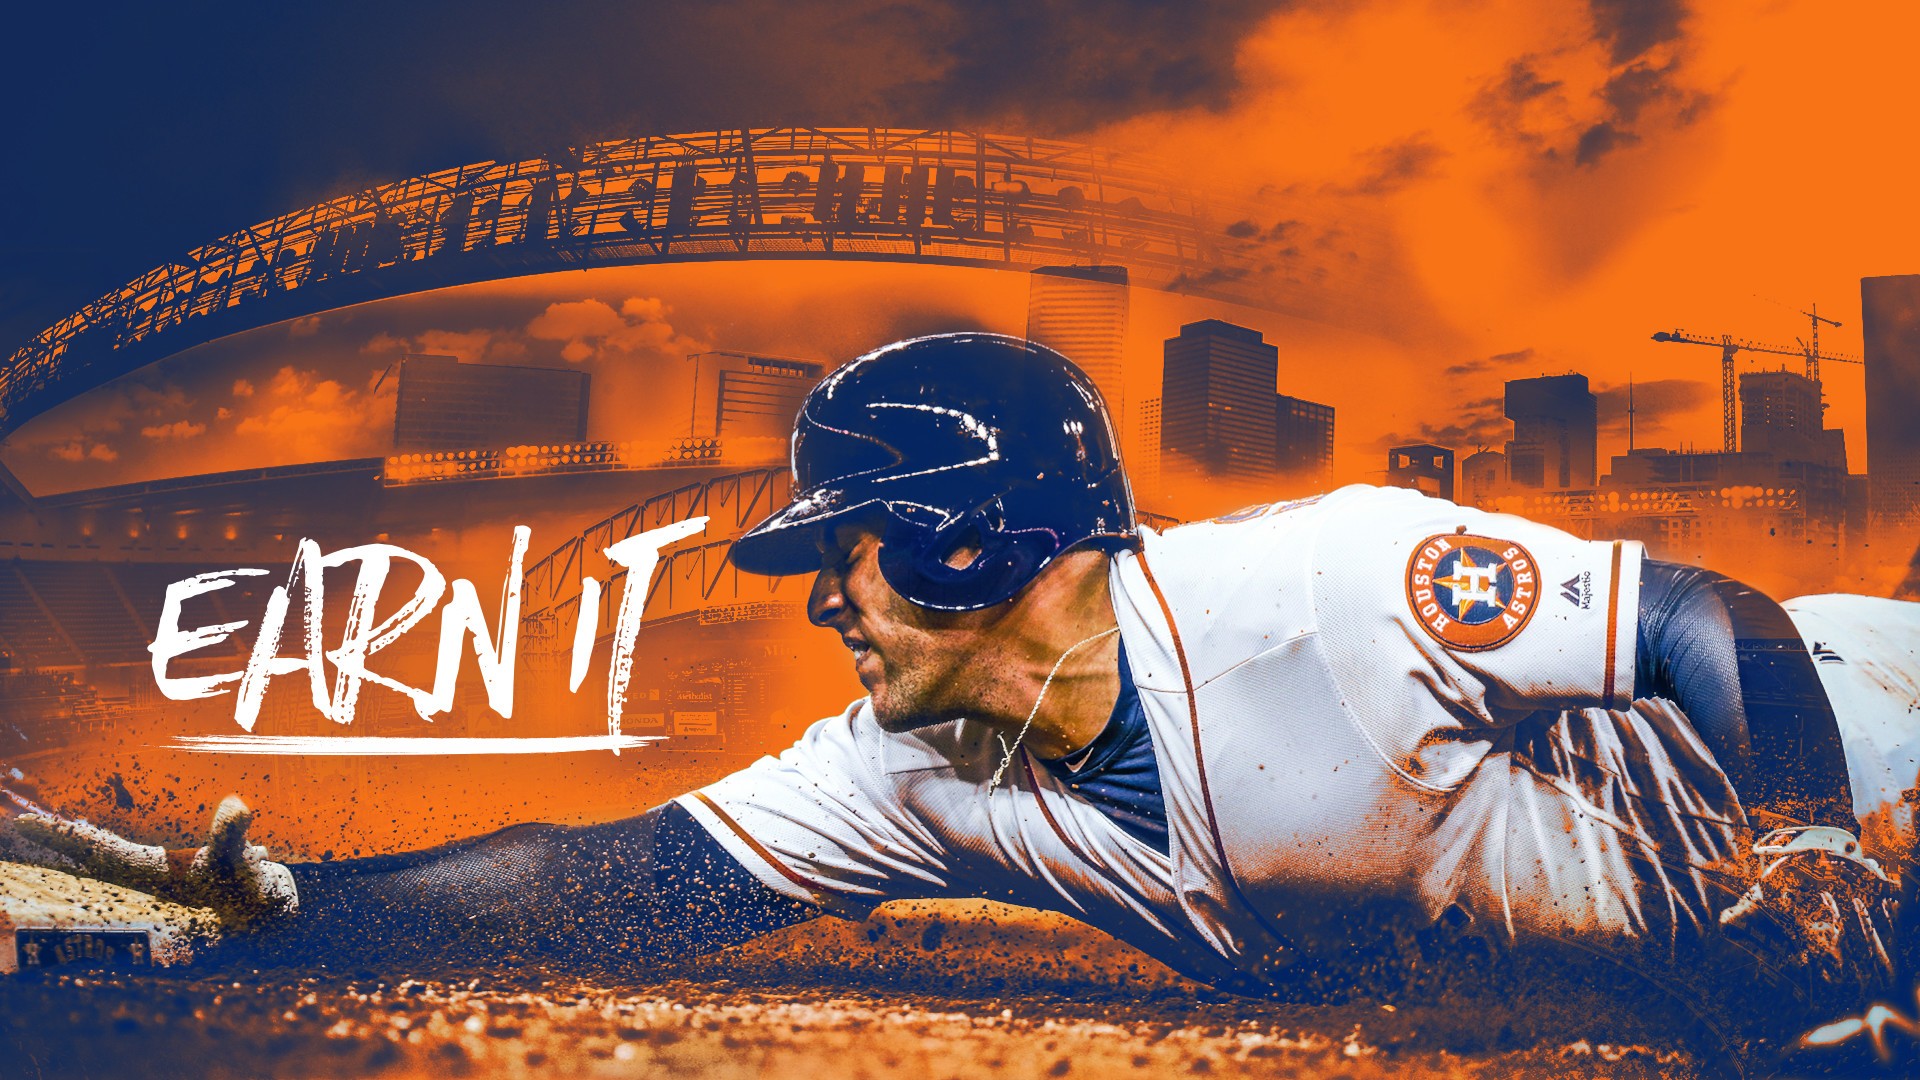 HD Backgrounds Houston Astros MLB With high-resolution 1920X1080 pixel. You can use this wallpaper for Mac Desktop Wallpaper, Laptop Screensavers, Android Wallpapers, Tablet or iPhone Home Screen and another mobile phone device